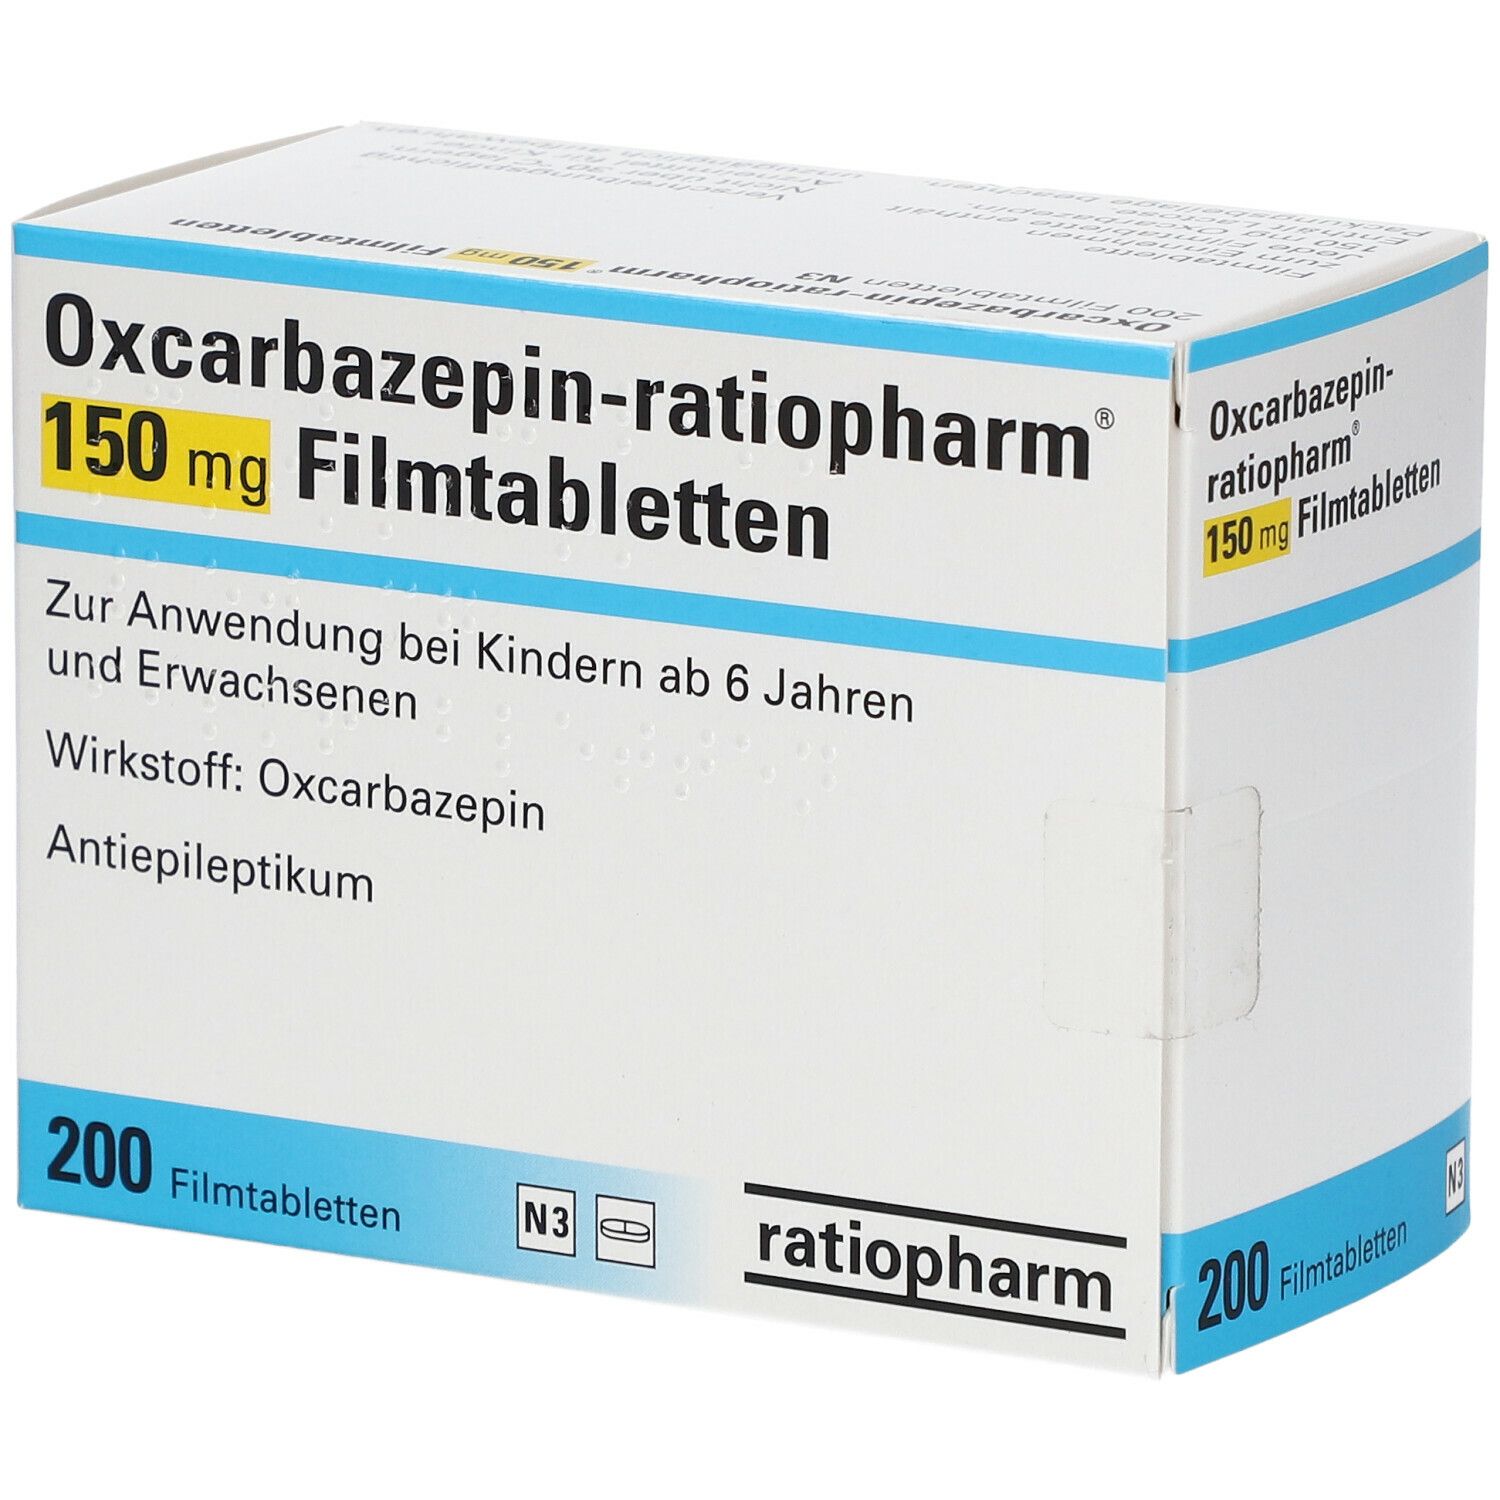 Oxcarbazepin-ratiopharm® 150 mg